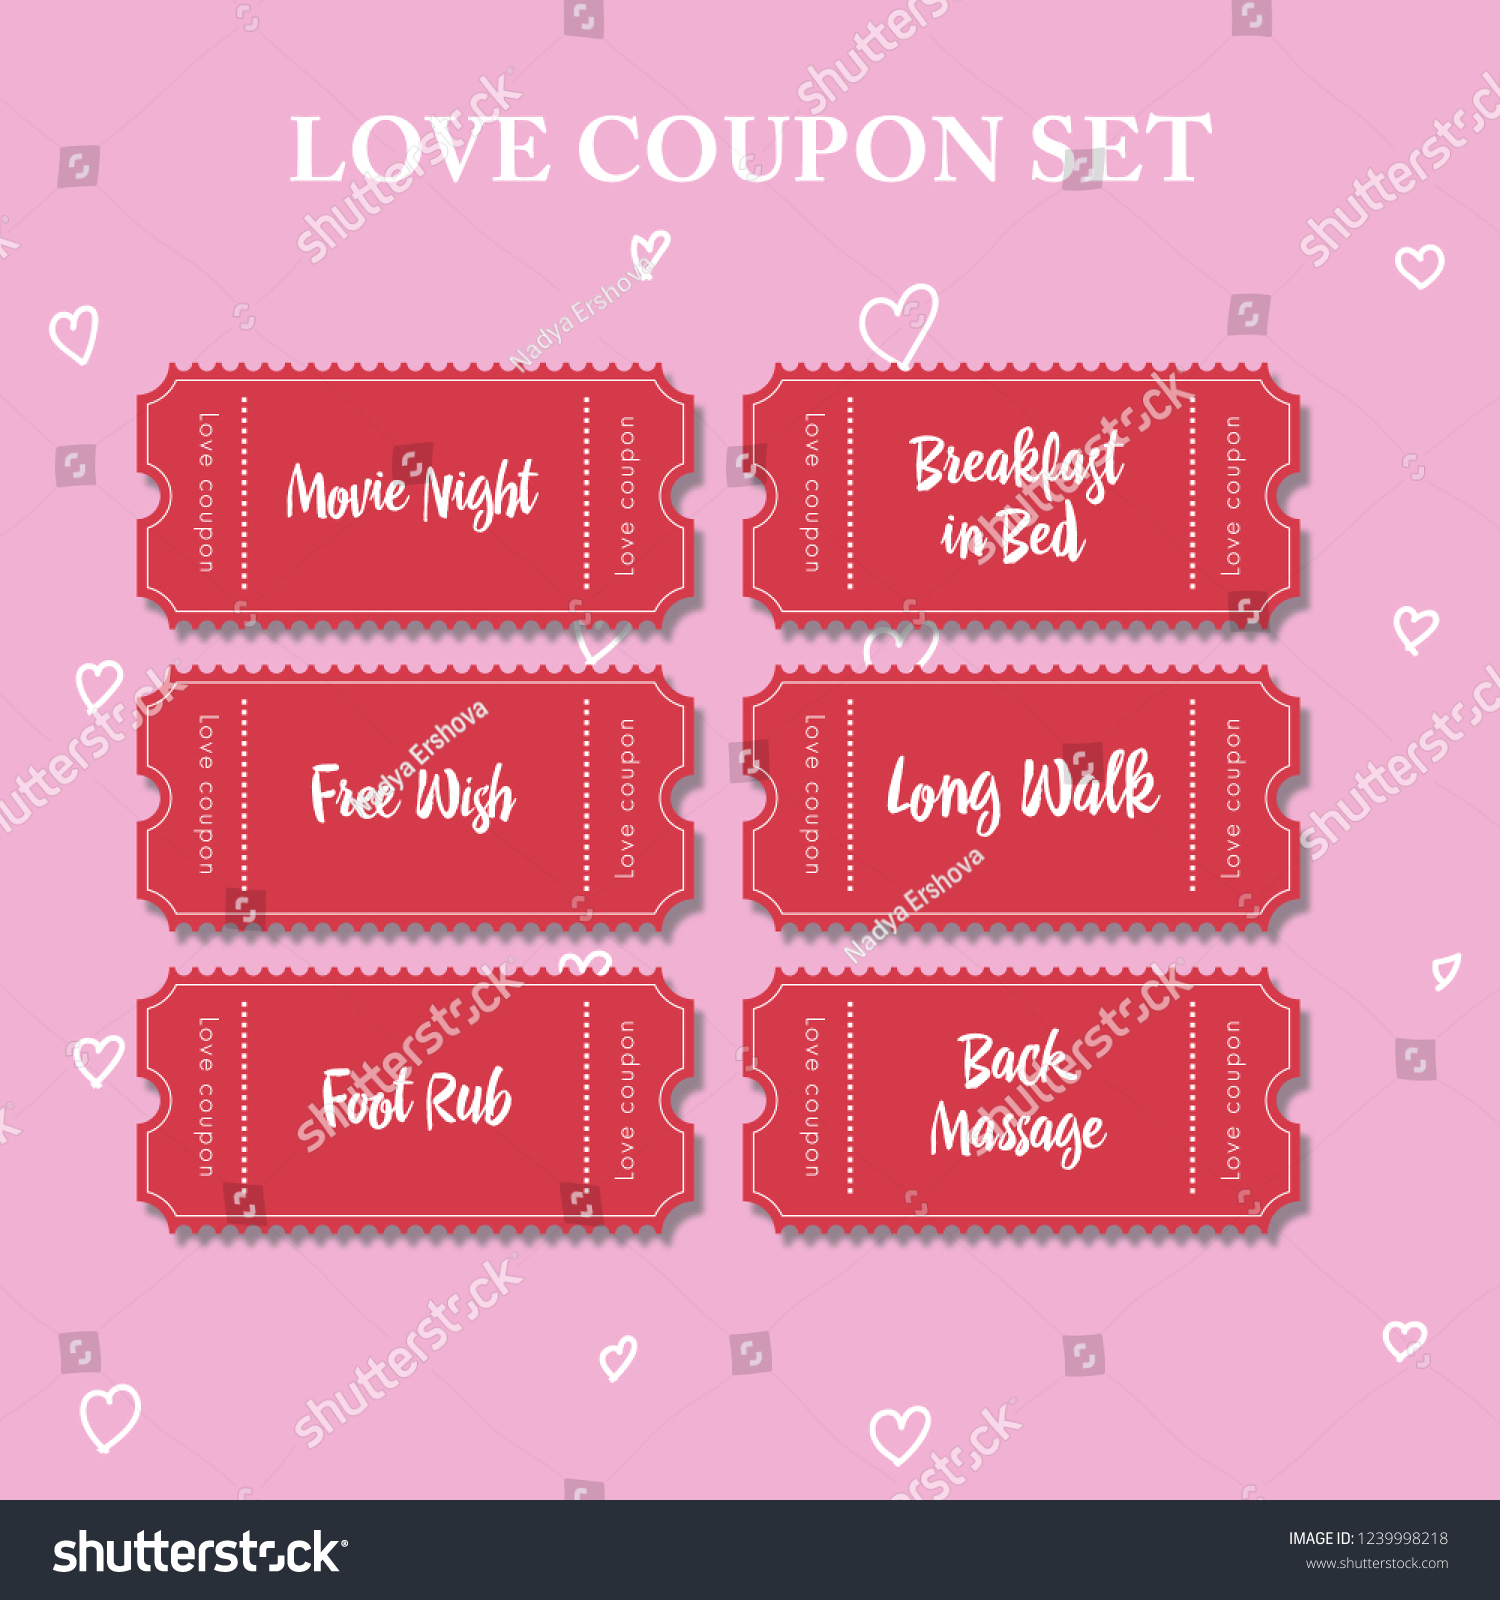 coupons for boyfriend